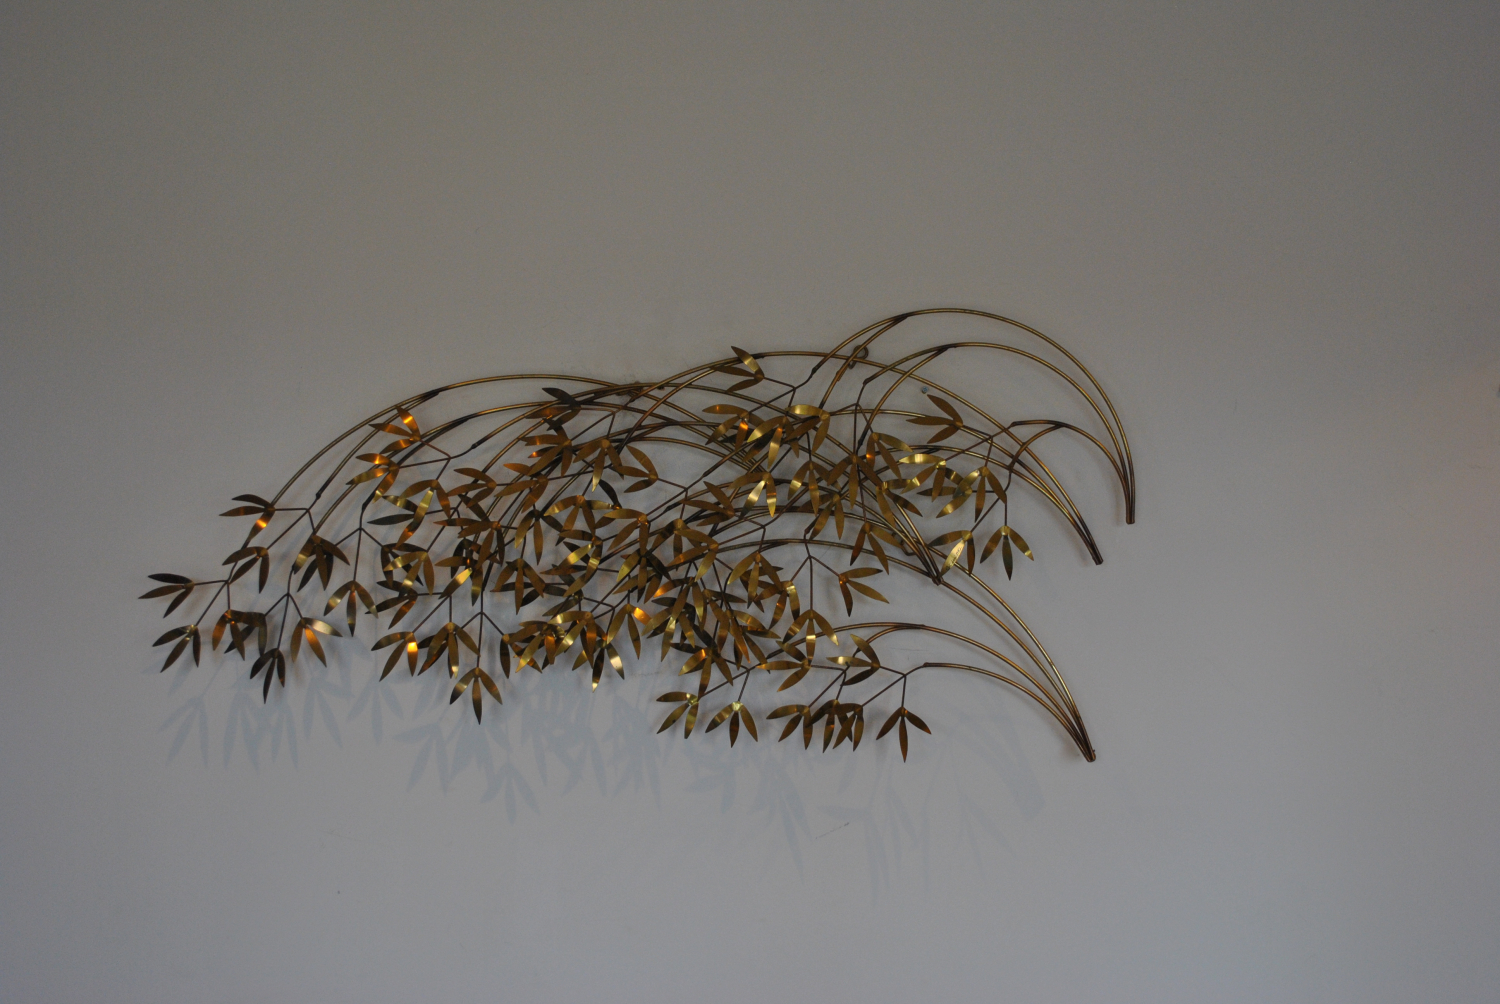 Falling Leaves Wall Sculpture